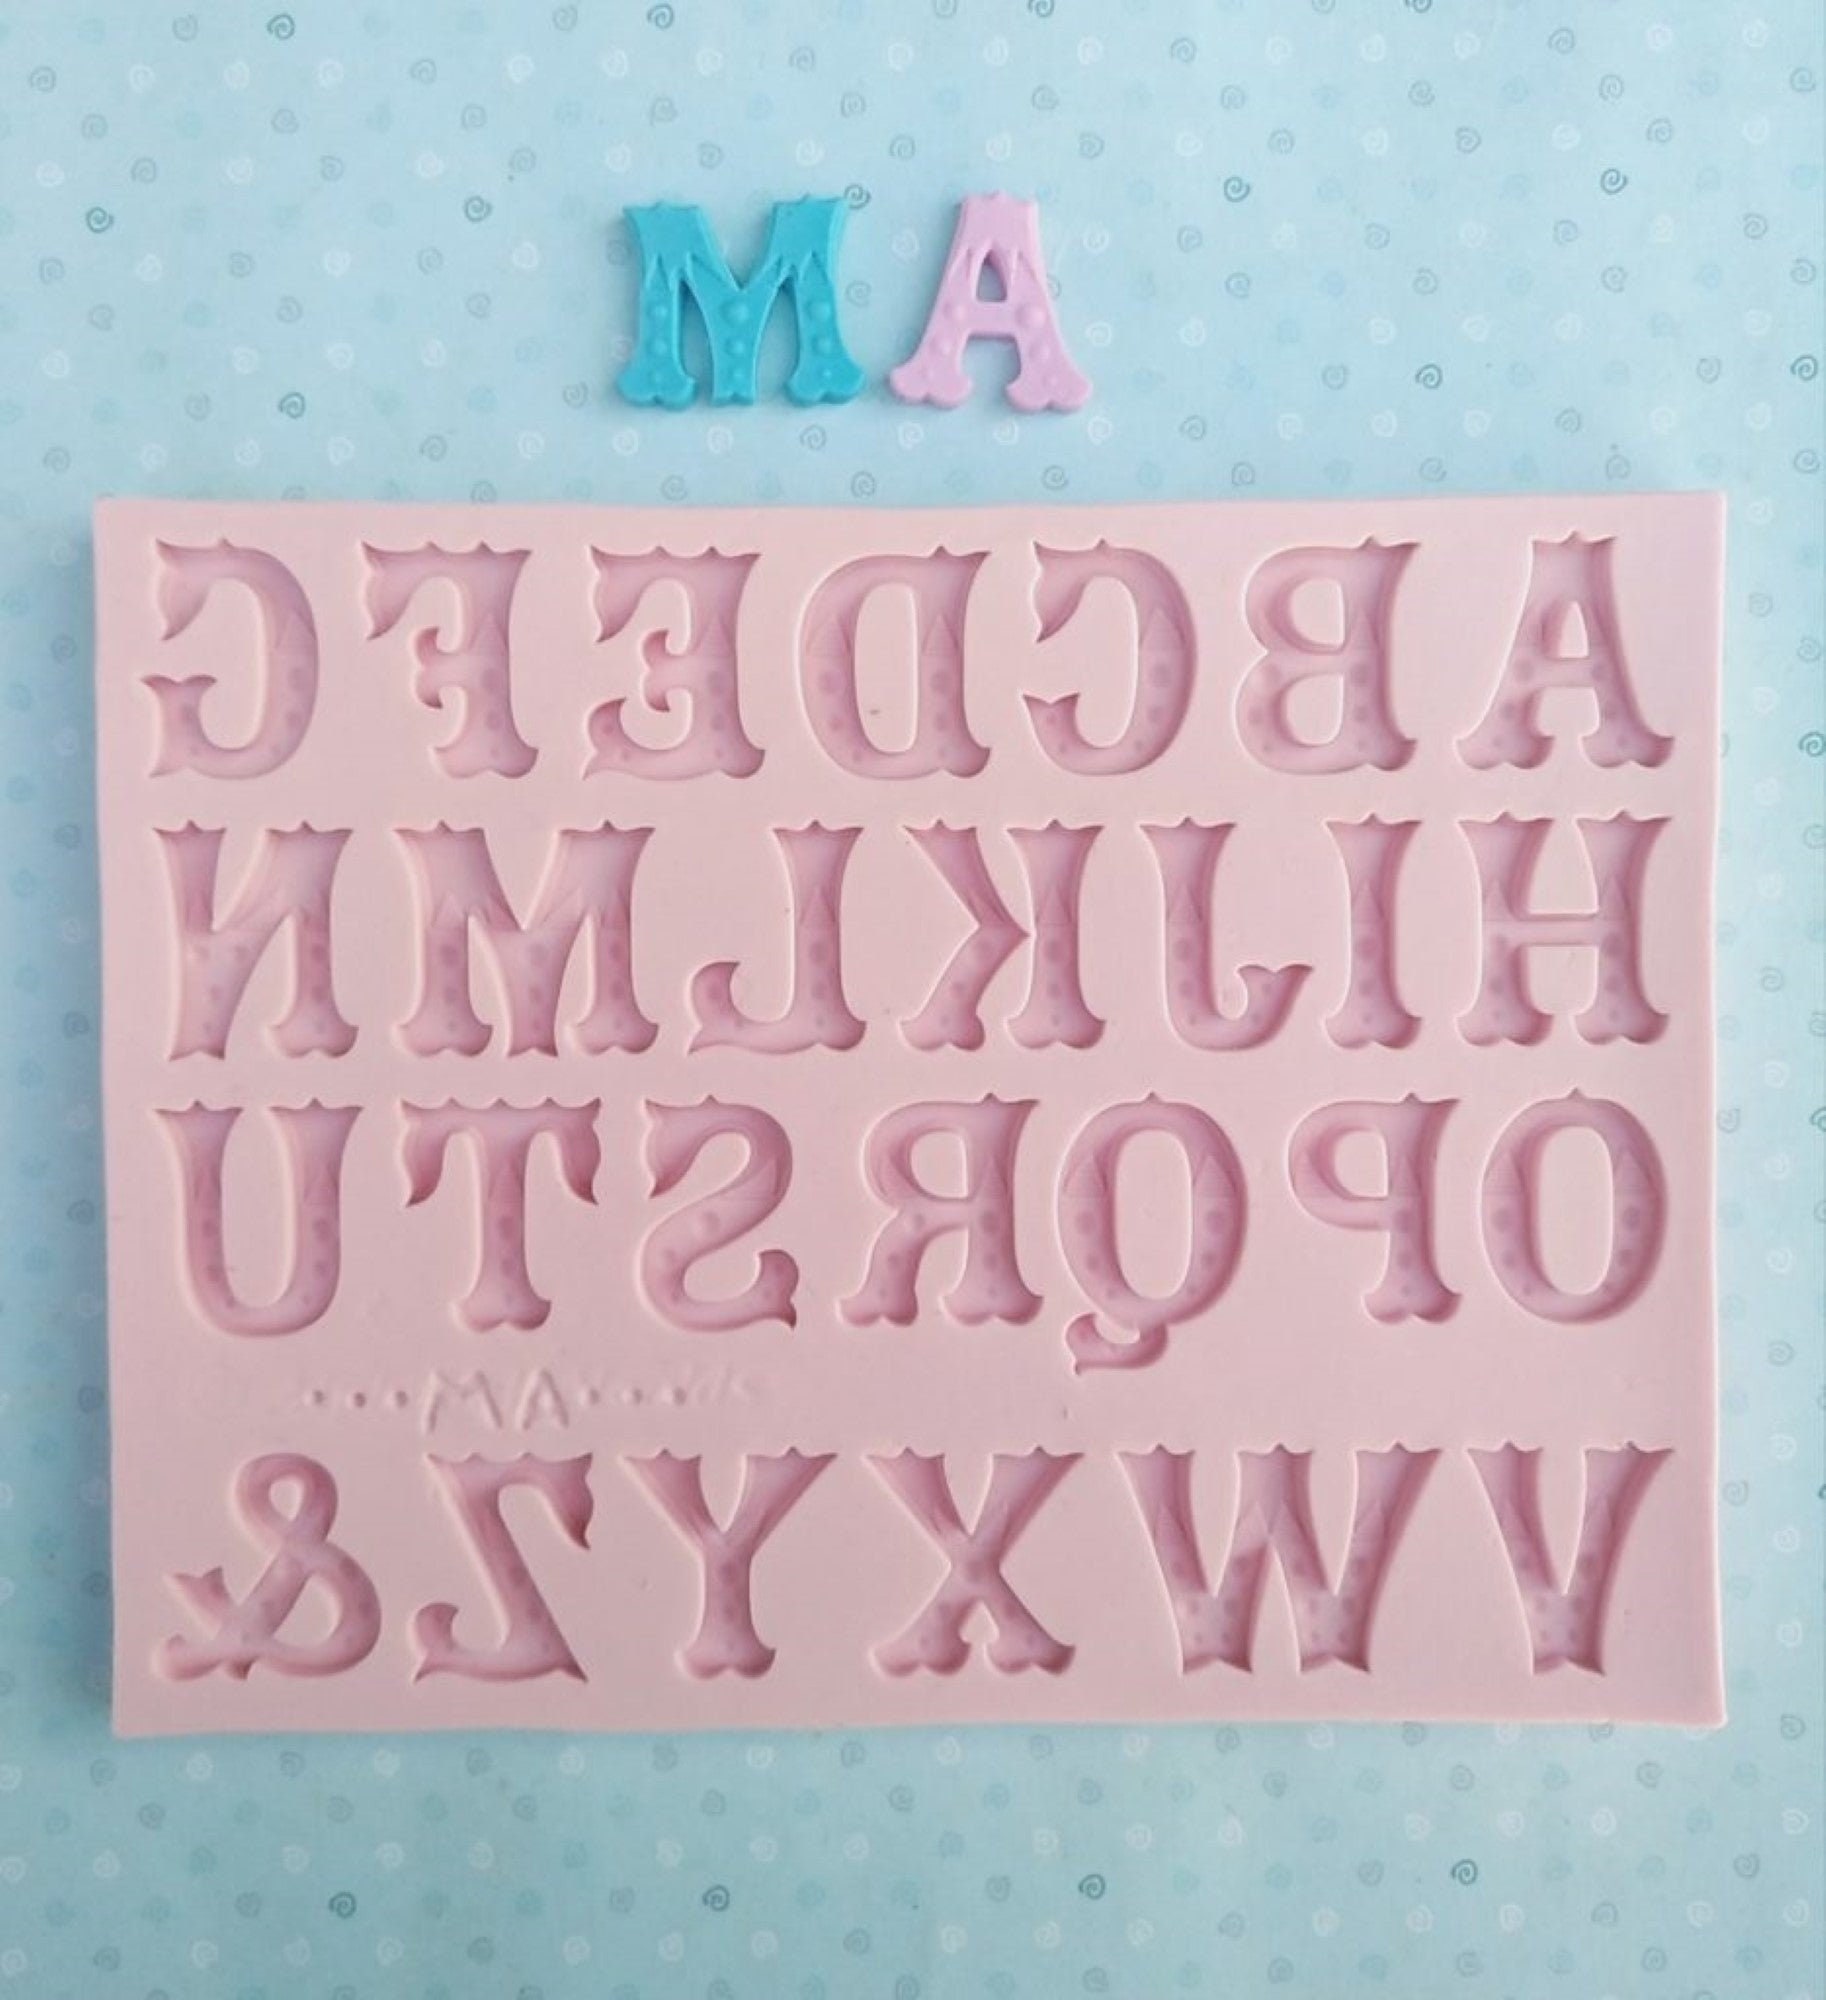 Small DIY Silicone Resin Mold For Letters Letter Mold Alphabet & Number Silicone  Molds Number Alphabet  Jewelry Keychain Casting Mold From Hc_network,  $4.39